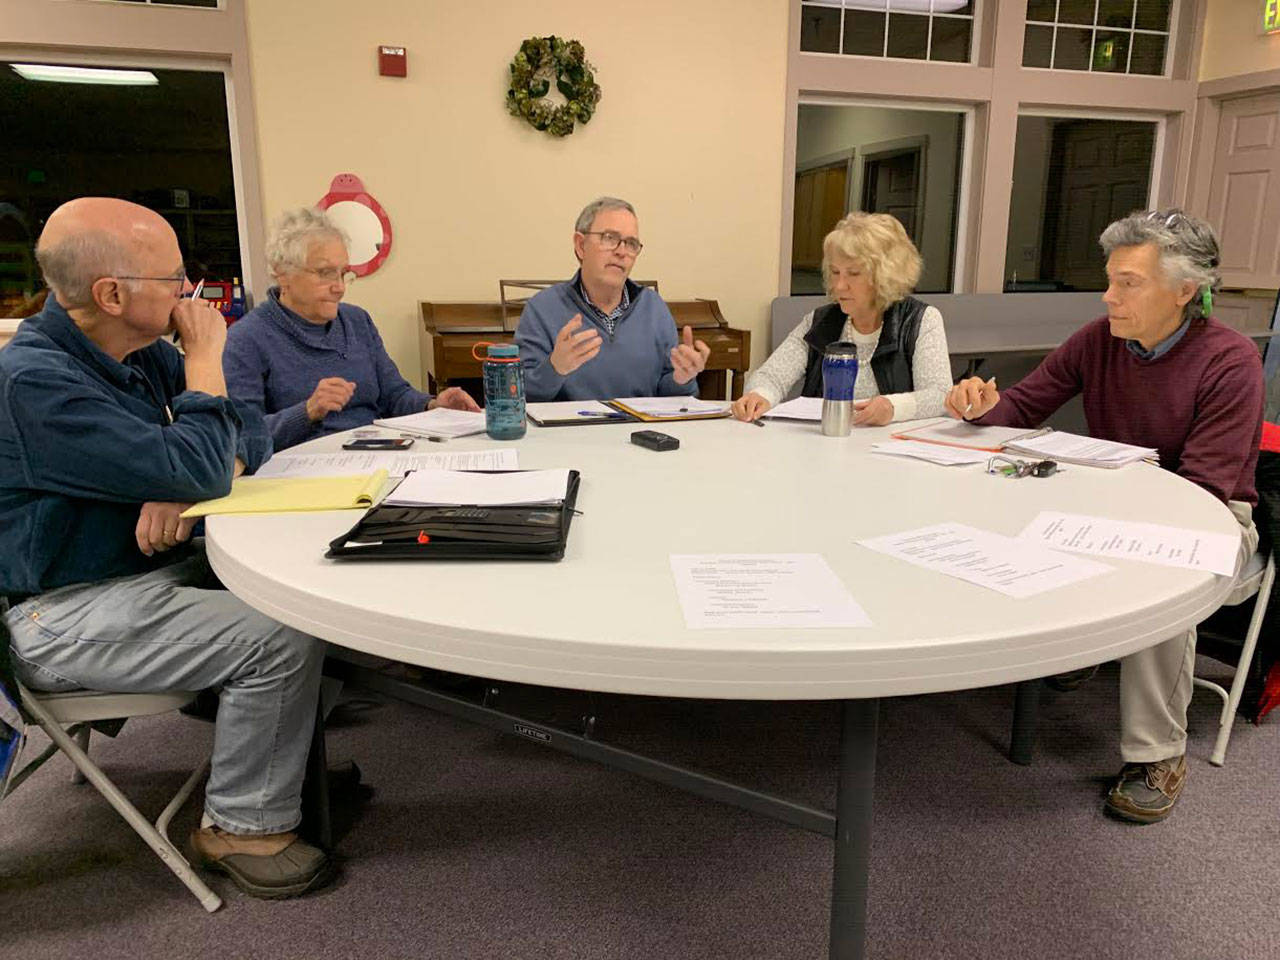 Vashon Health Care District Board of Commissioners (left to right): Eric Pyrne, Wendy Noble, Tom Langland, LeeAnn Brown and Don Wolczko meet at the Presbyterian Church on Jan. 8. (Kevin Opsahl/Staff Photo)